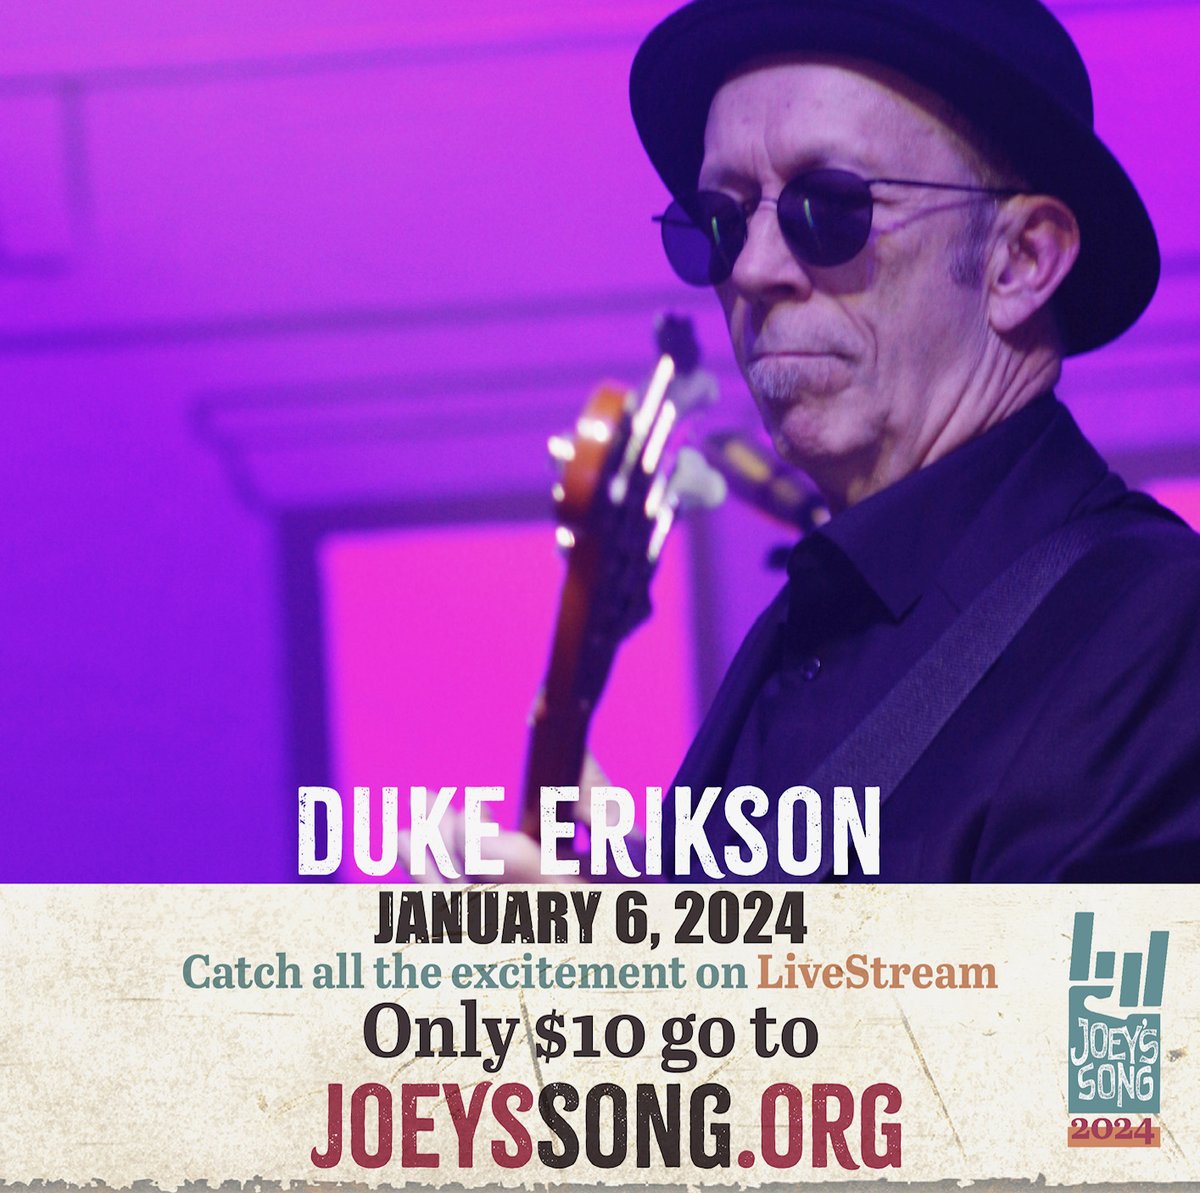 Duke and I will be performing in the “Battle of the Bands” concert for @joeyssong on Jan 6th.  The one-of-a-kind concert raises funds to fight epilepsy. If you can’t make it to Madison then tune into the livestream on Saturday. Tickets are only $10. Go to joeyssong.org/about-3